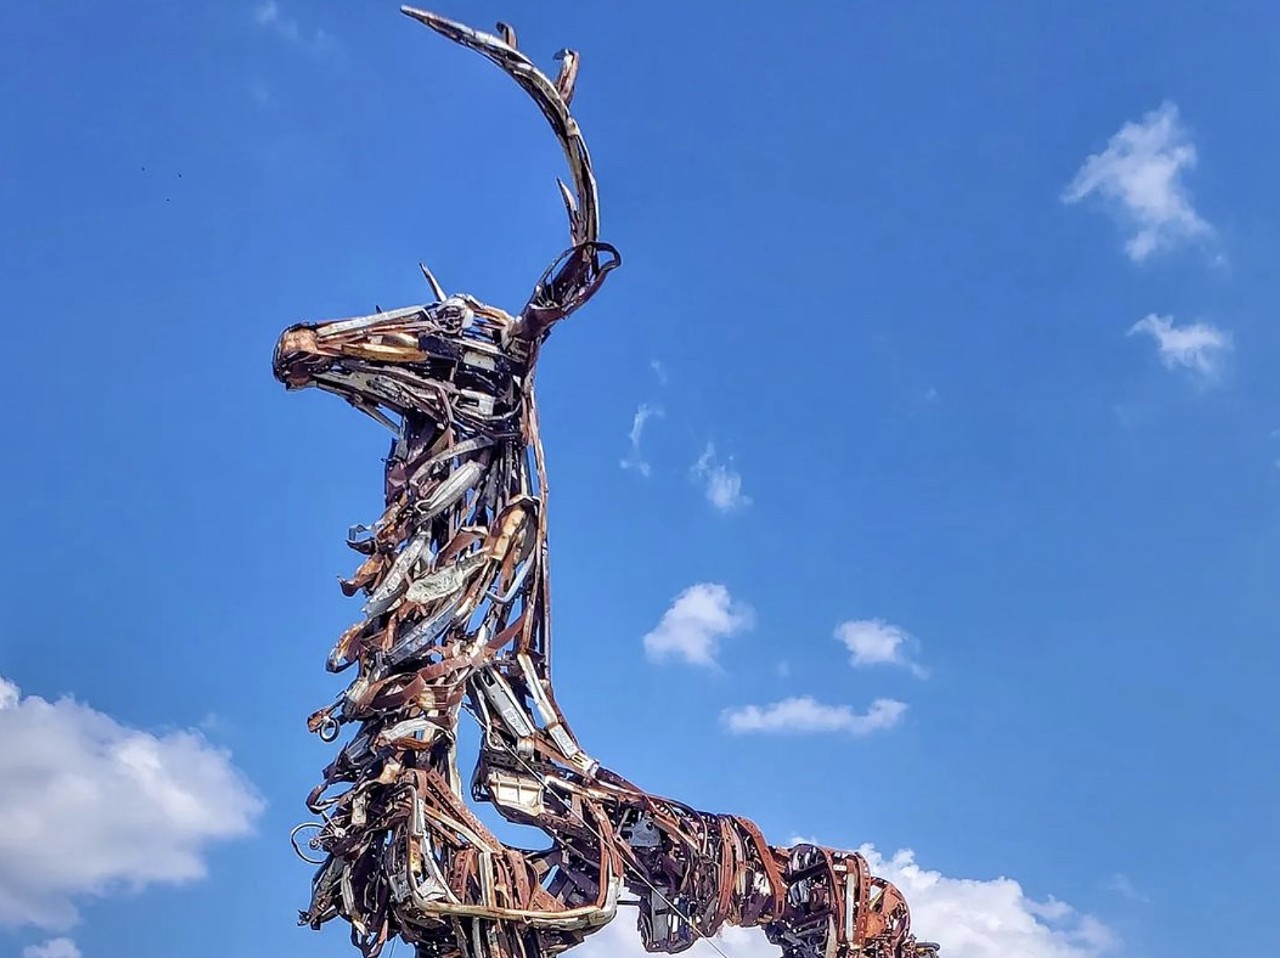 Giant Stag Made of Junk
4203 Loring Park, Converse
Built from various rusted metal parts — fenders and typewriters included — this Florentino Narcis creation stands 40 feet tall in the midst of a neighborhood in Converse.